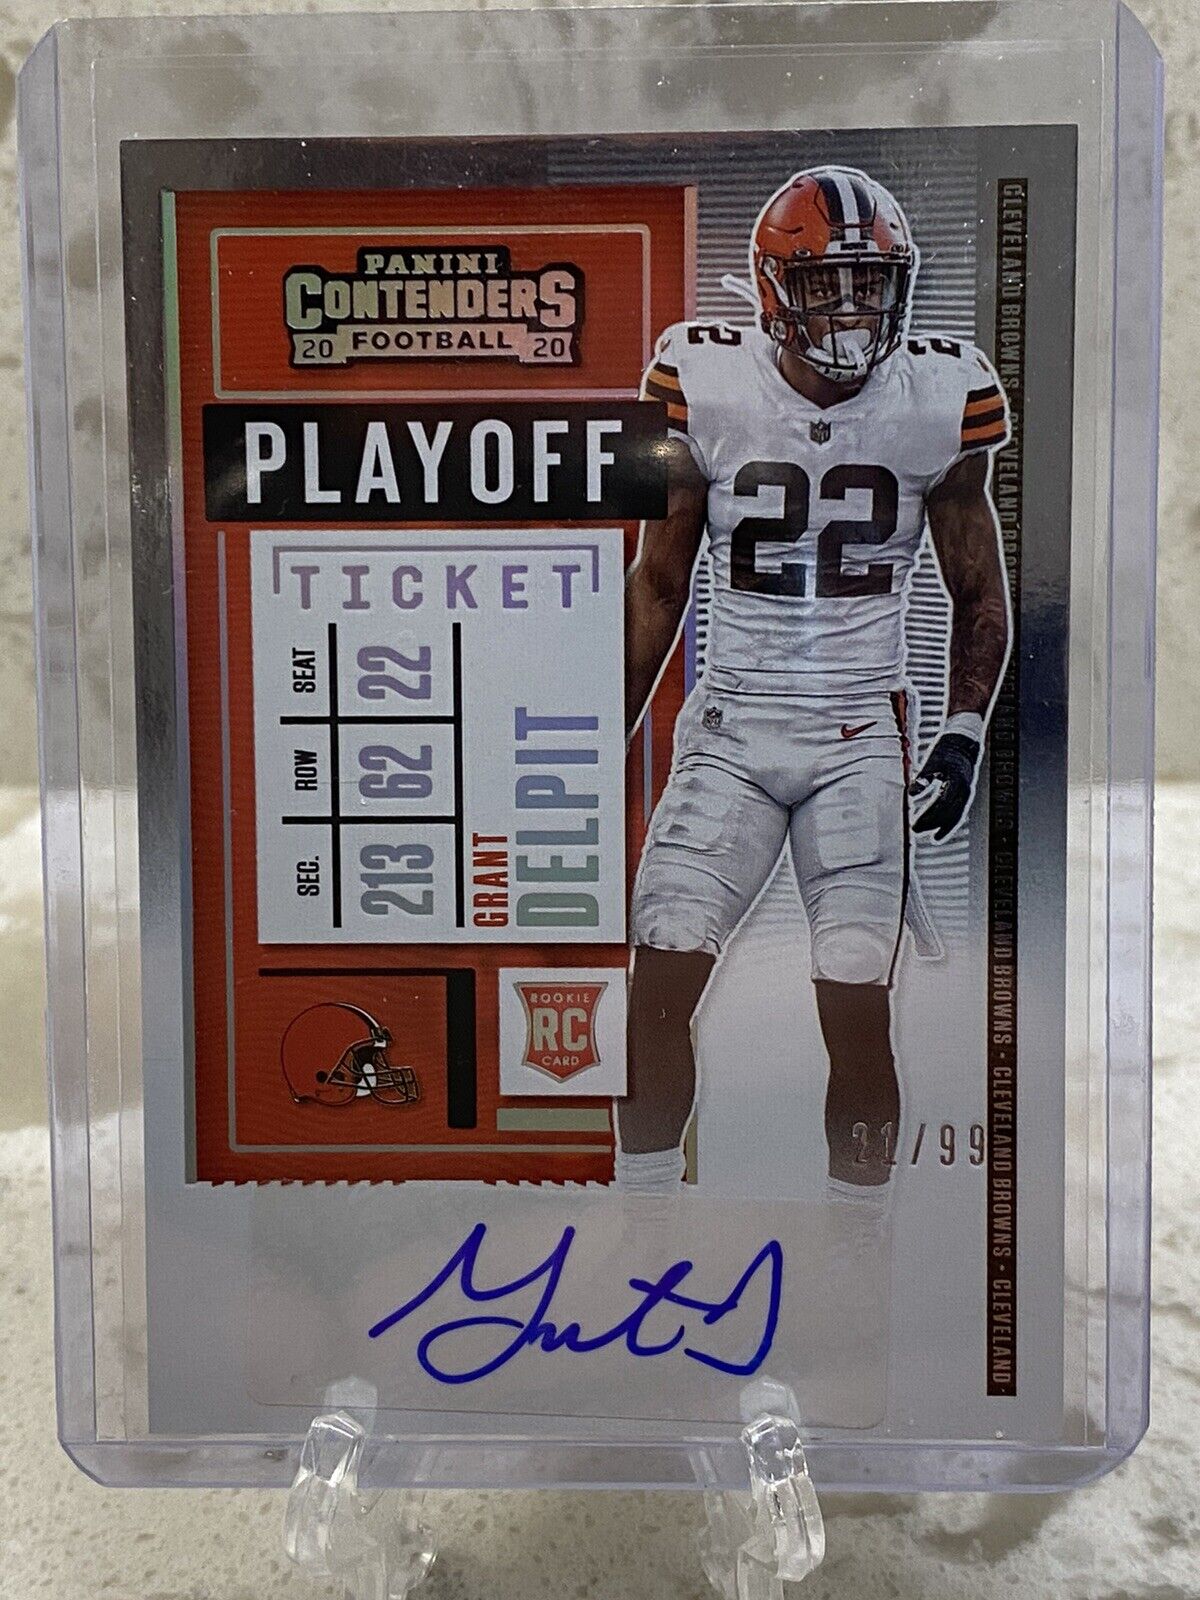 2020 Grant Delpit Panini Contenders Playoff Ticket Rookie Autograph 21/99